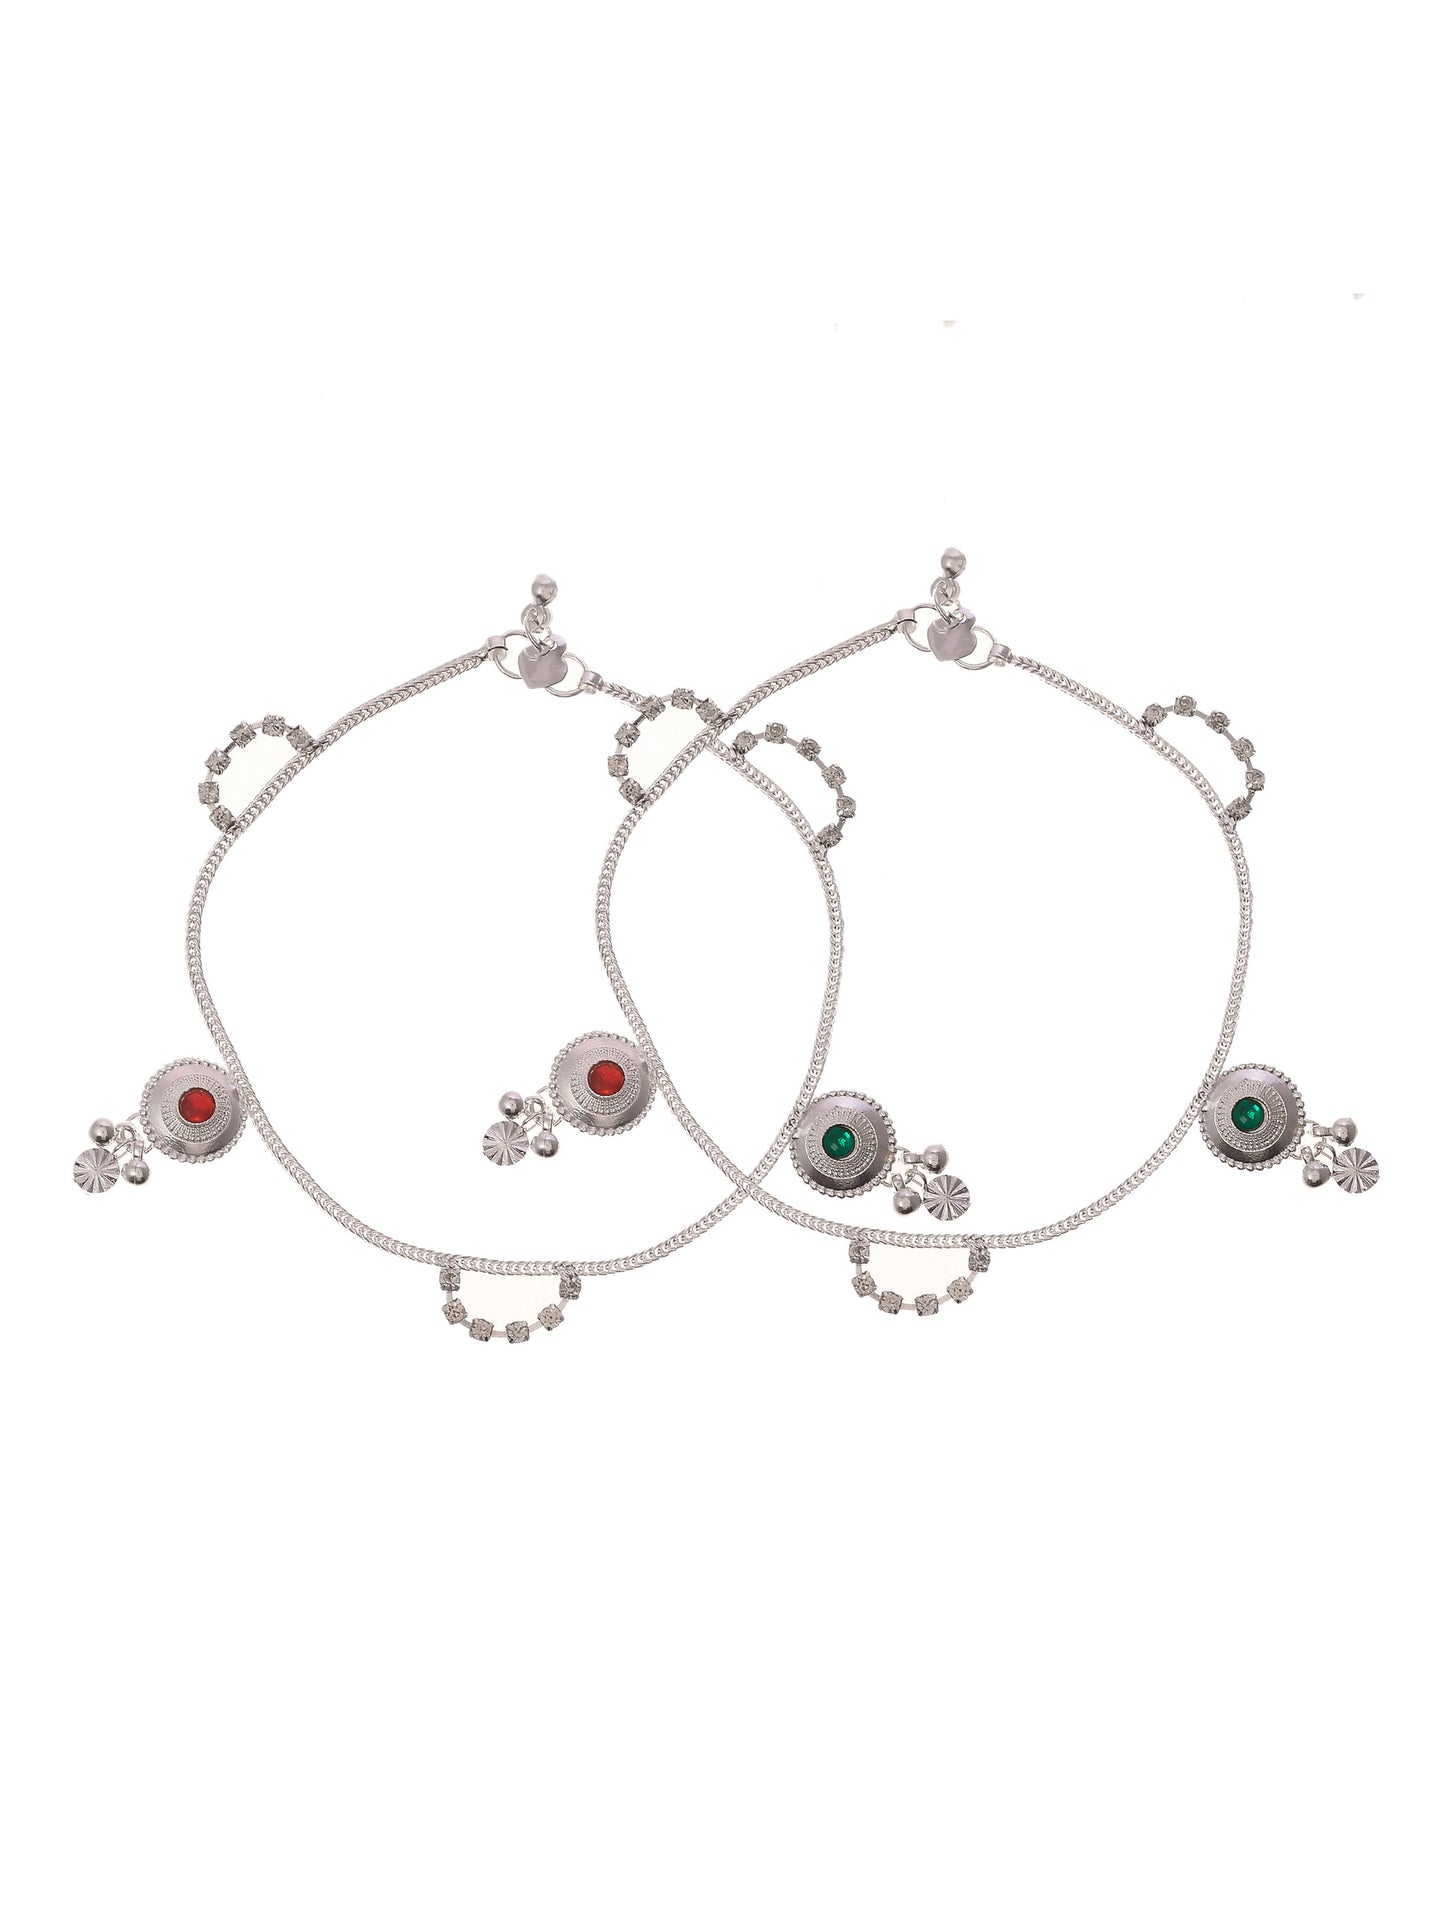 Silver Anklets with stones traditional payal for women.